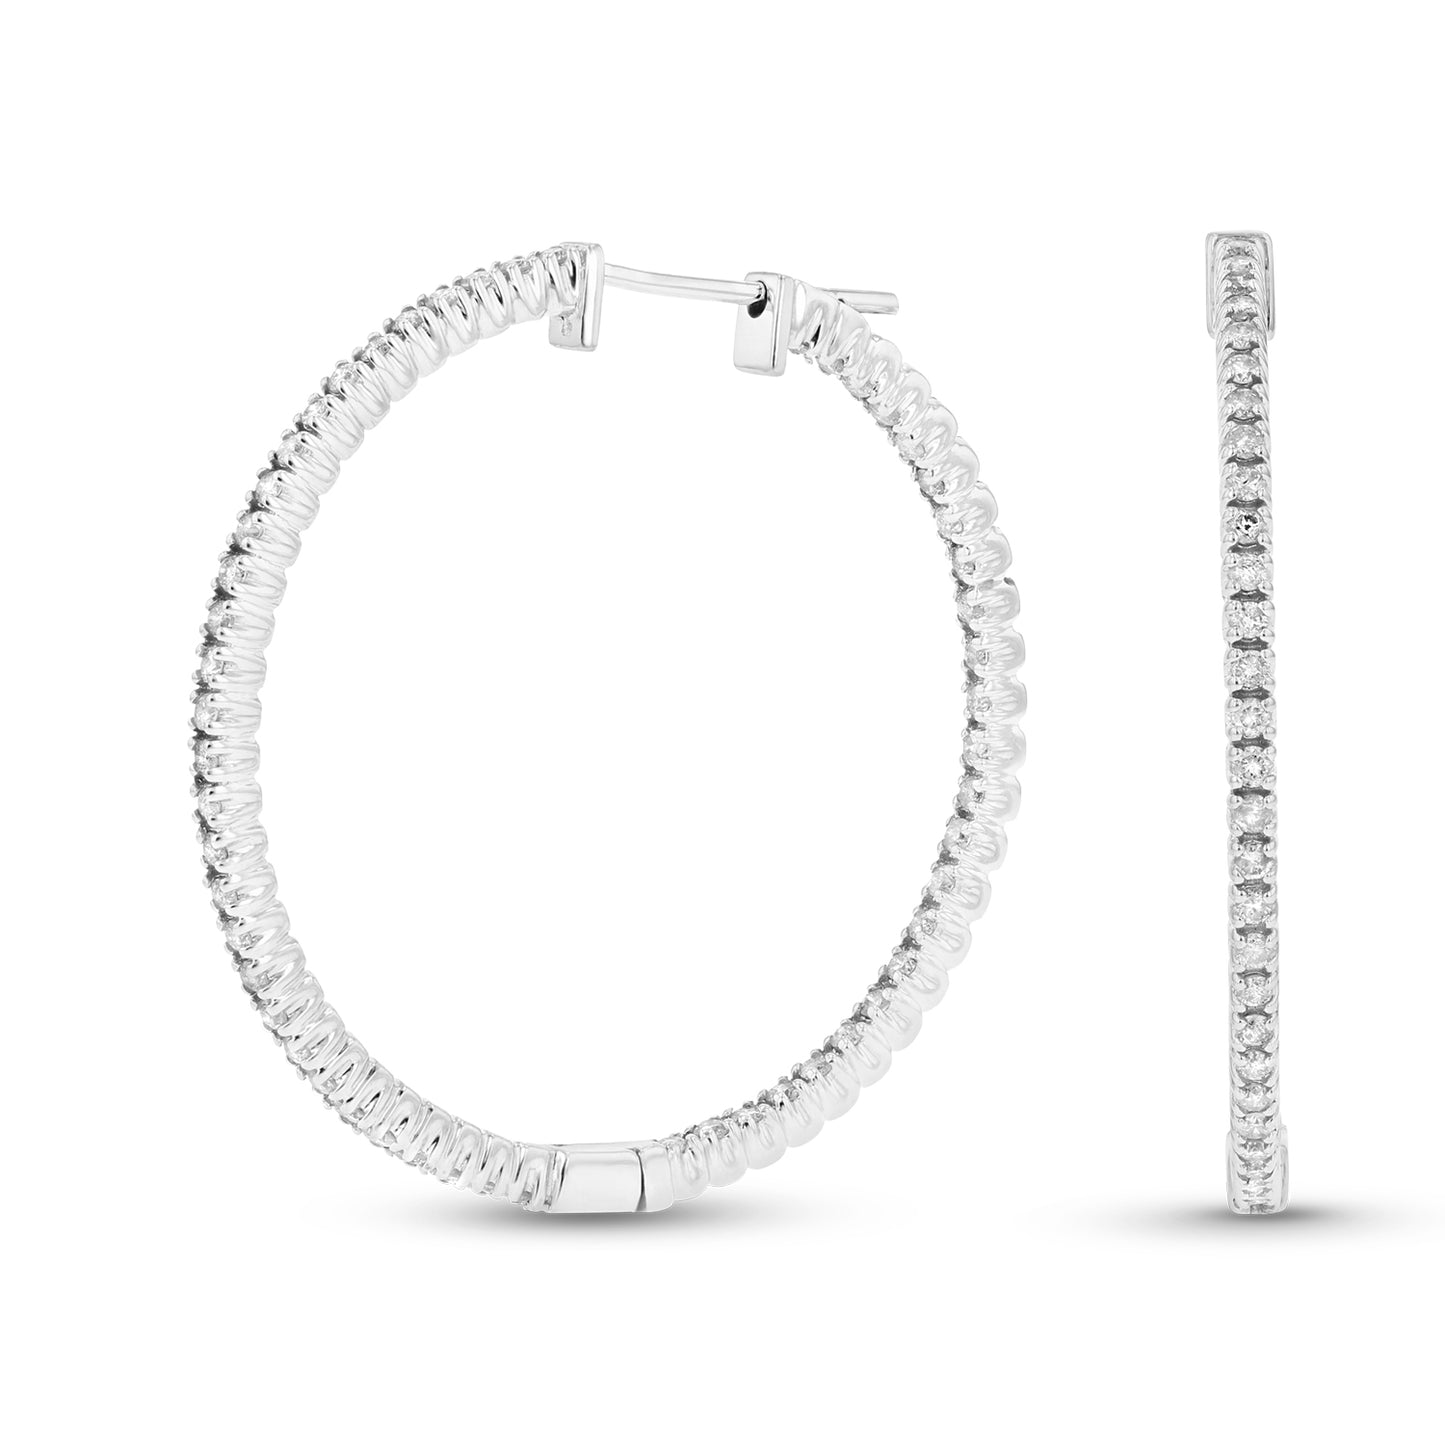 14k Gold Hoop Earrings with 1.10cttw of Diamonds. 1 1/4 Inches in Diameter - Crestwood Jewelers